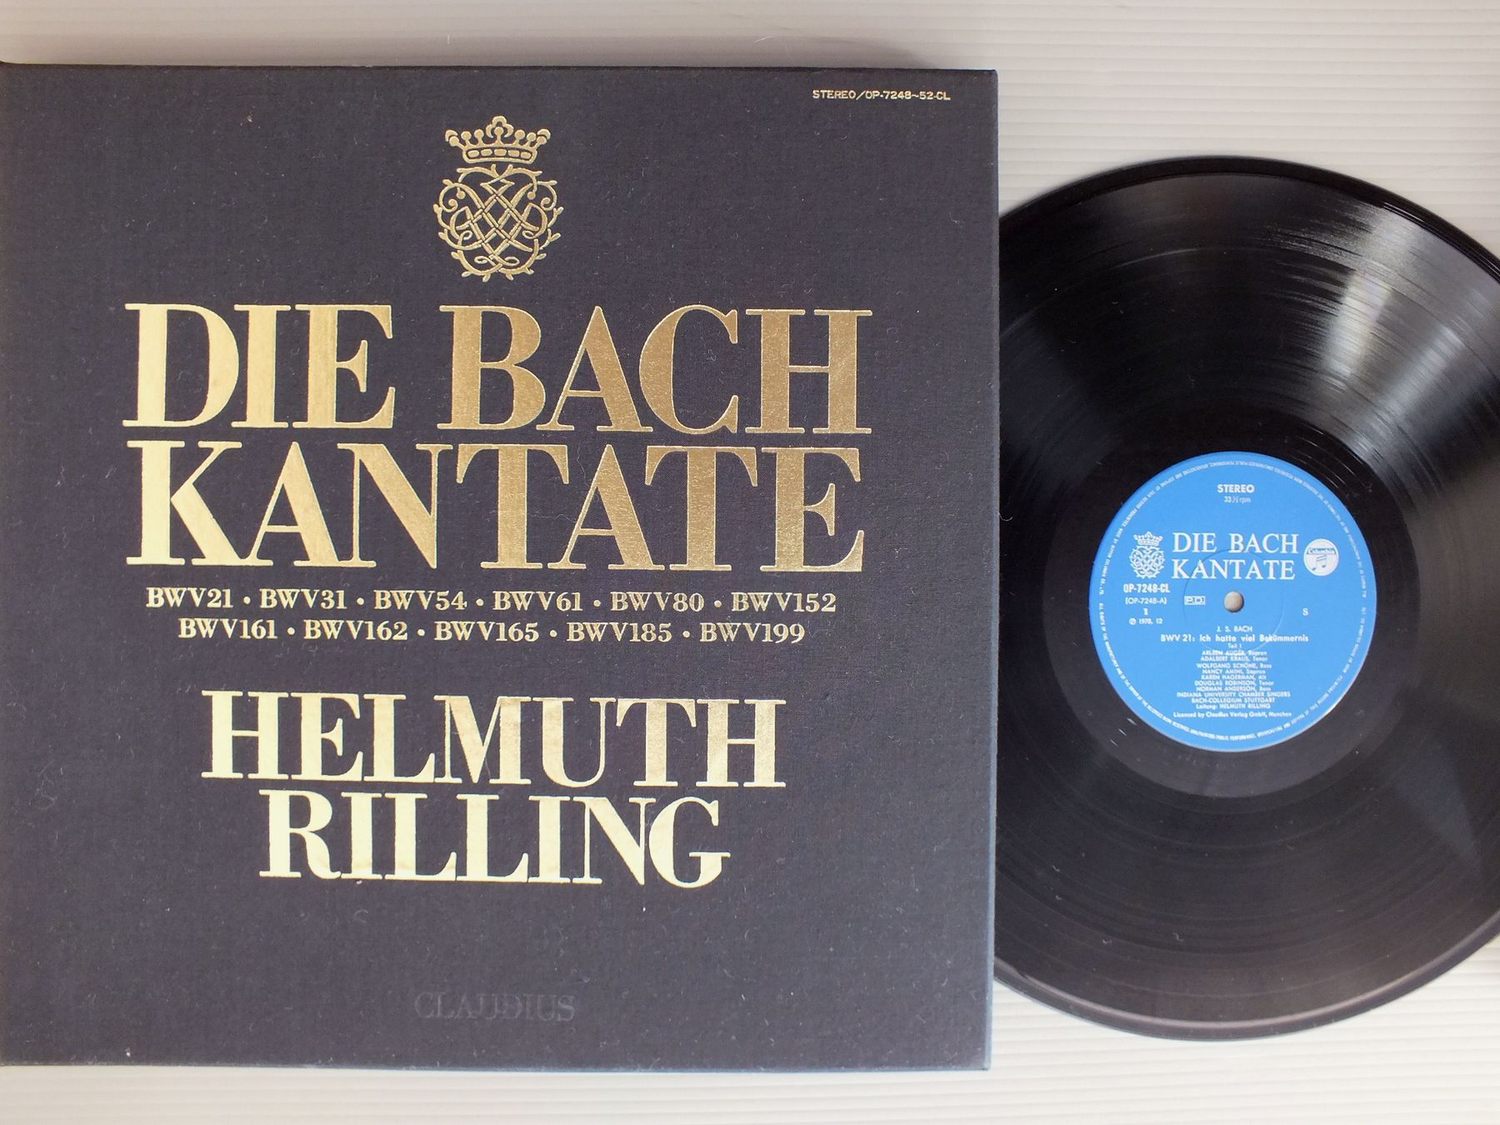 HELMUTH RILLINGヘルムート・リリング/DIE BACH KANTATEバッハ教会カンタータ集-2 OP7248-52CL